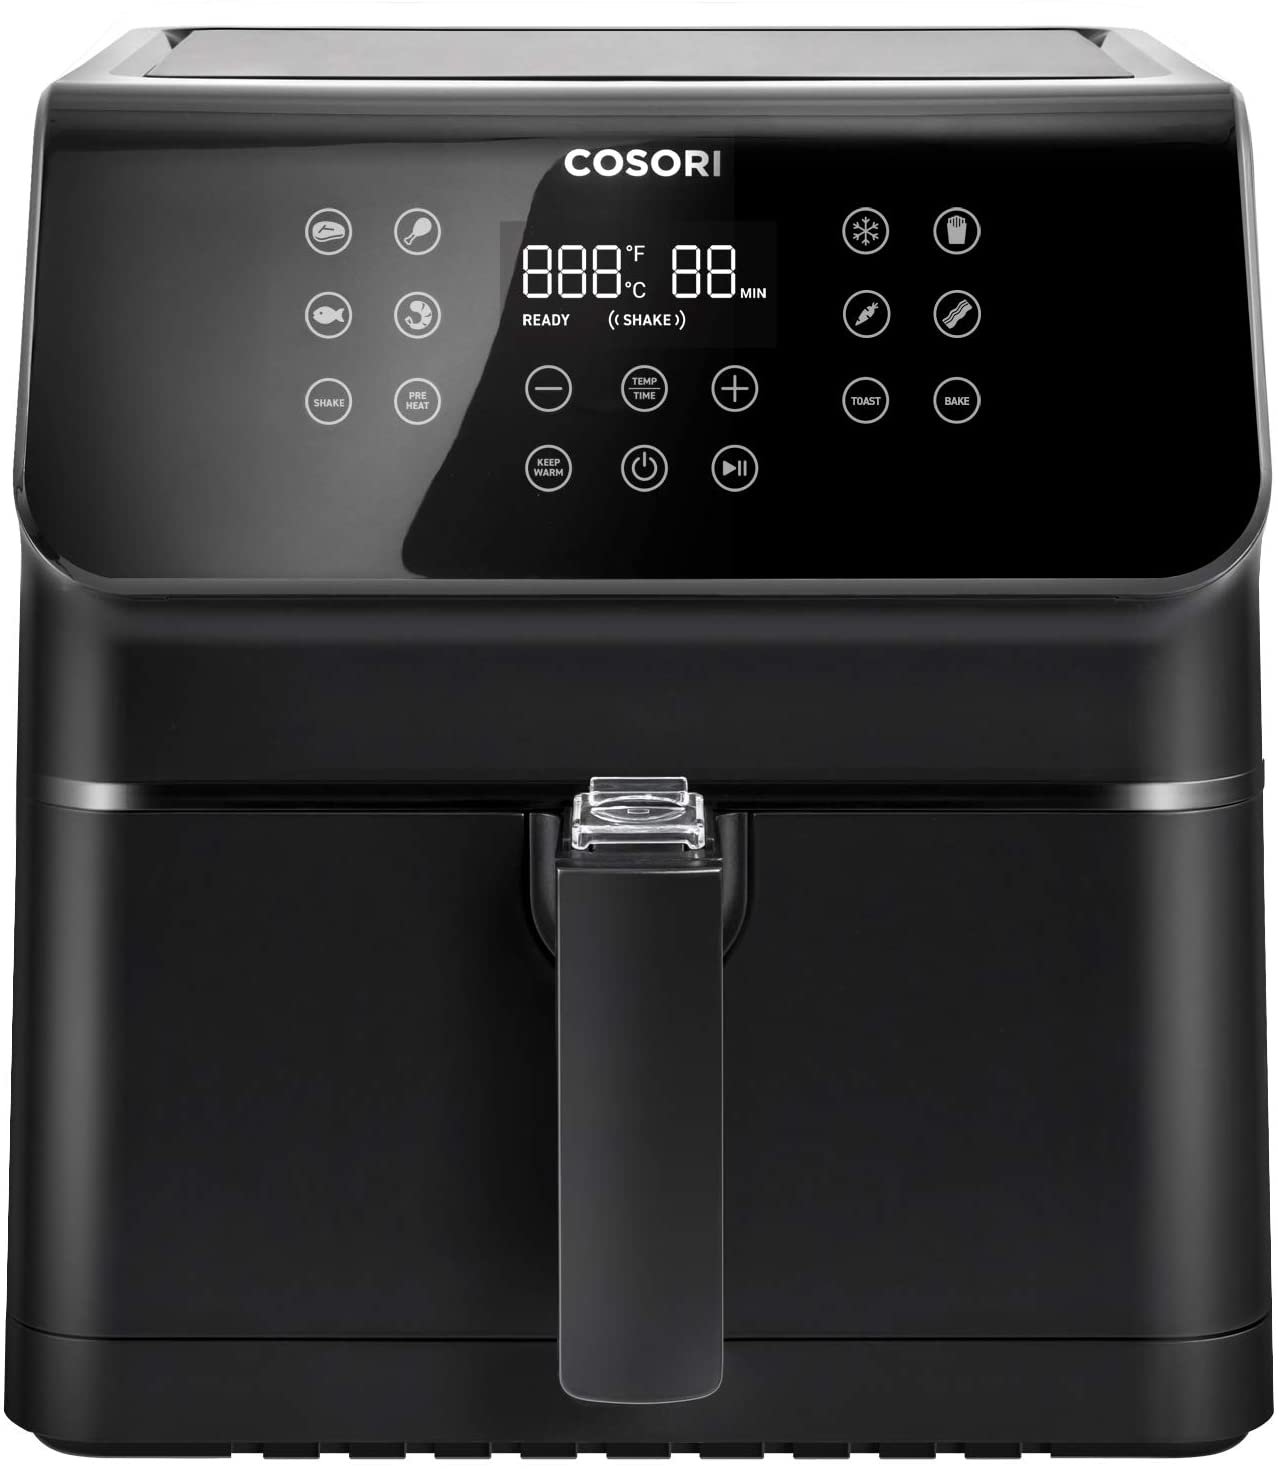 COSORI Air Fryer, Large XL 5.8 Quart 1700-Watt Air Fryer Oven & Oilless Cooker with Cookbook(100 Recipes) LED Digital Tilt One-Touchscreen with Preheat, Customizable 10 Presets & Shake Reminder, Black